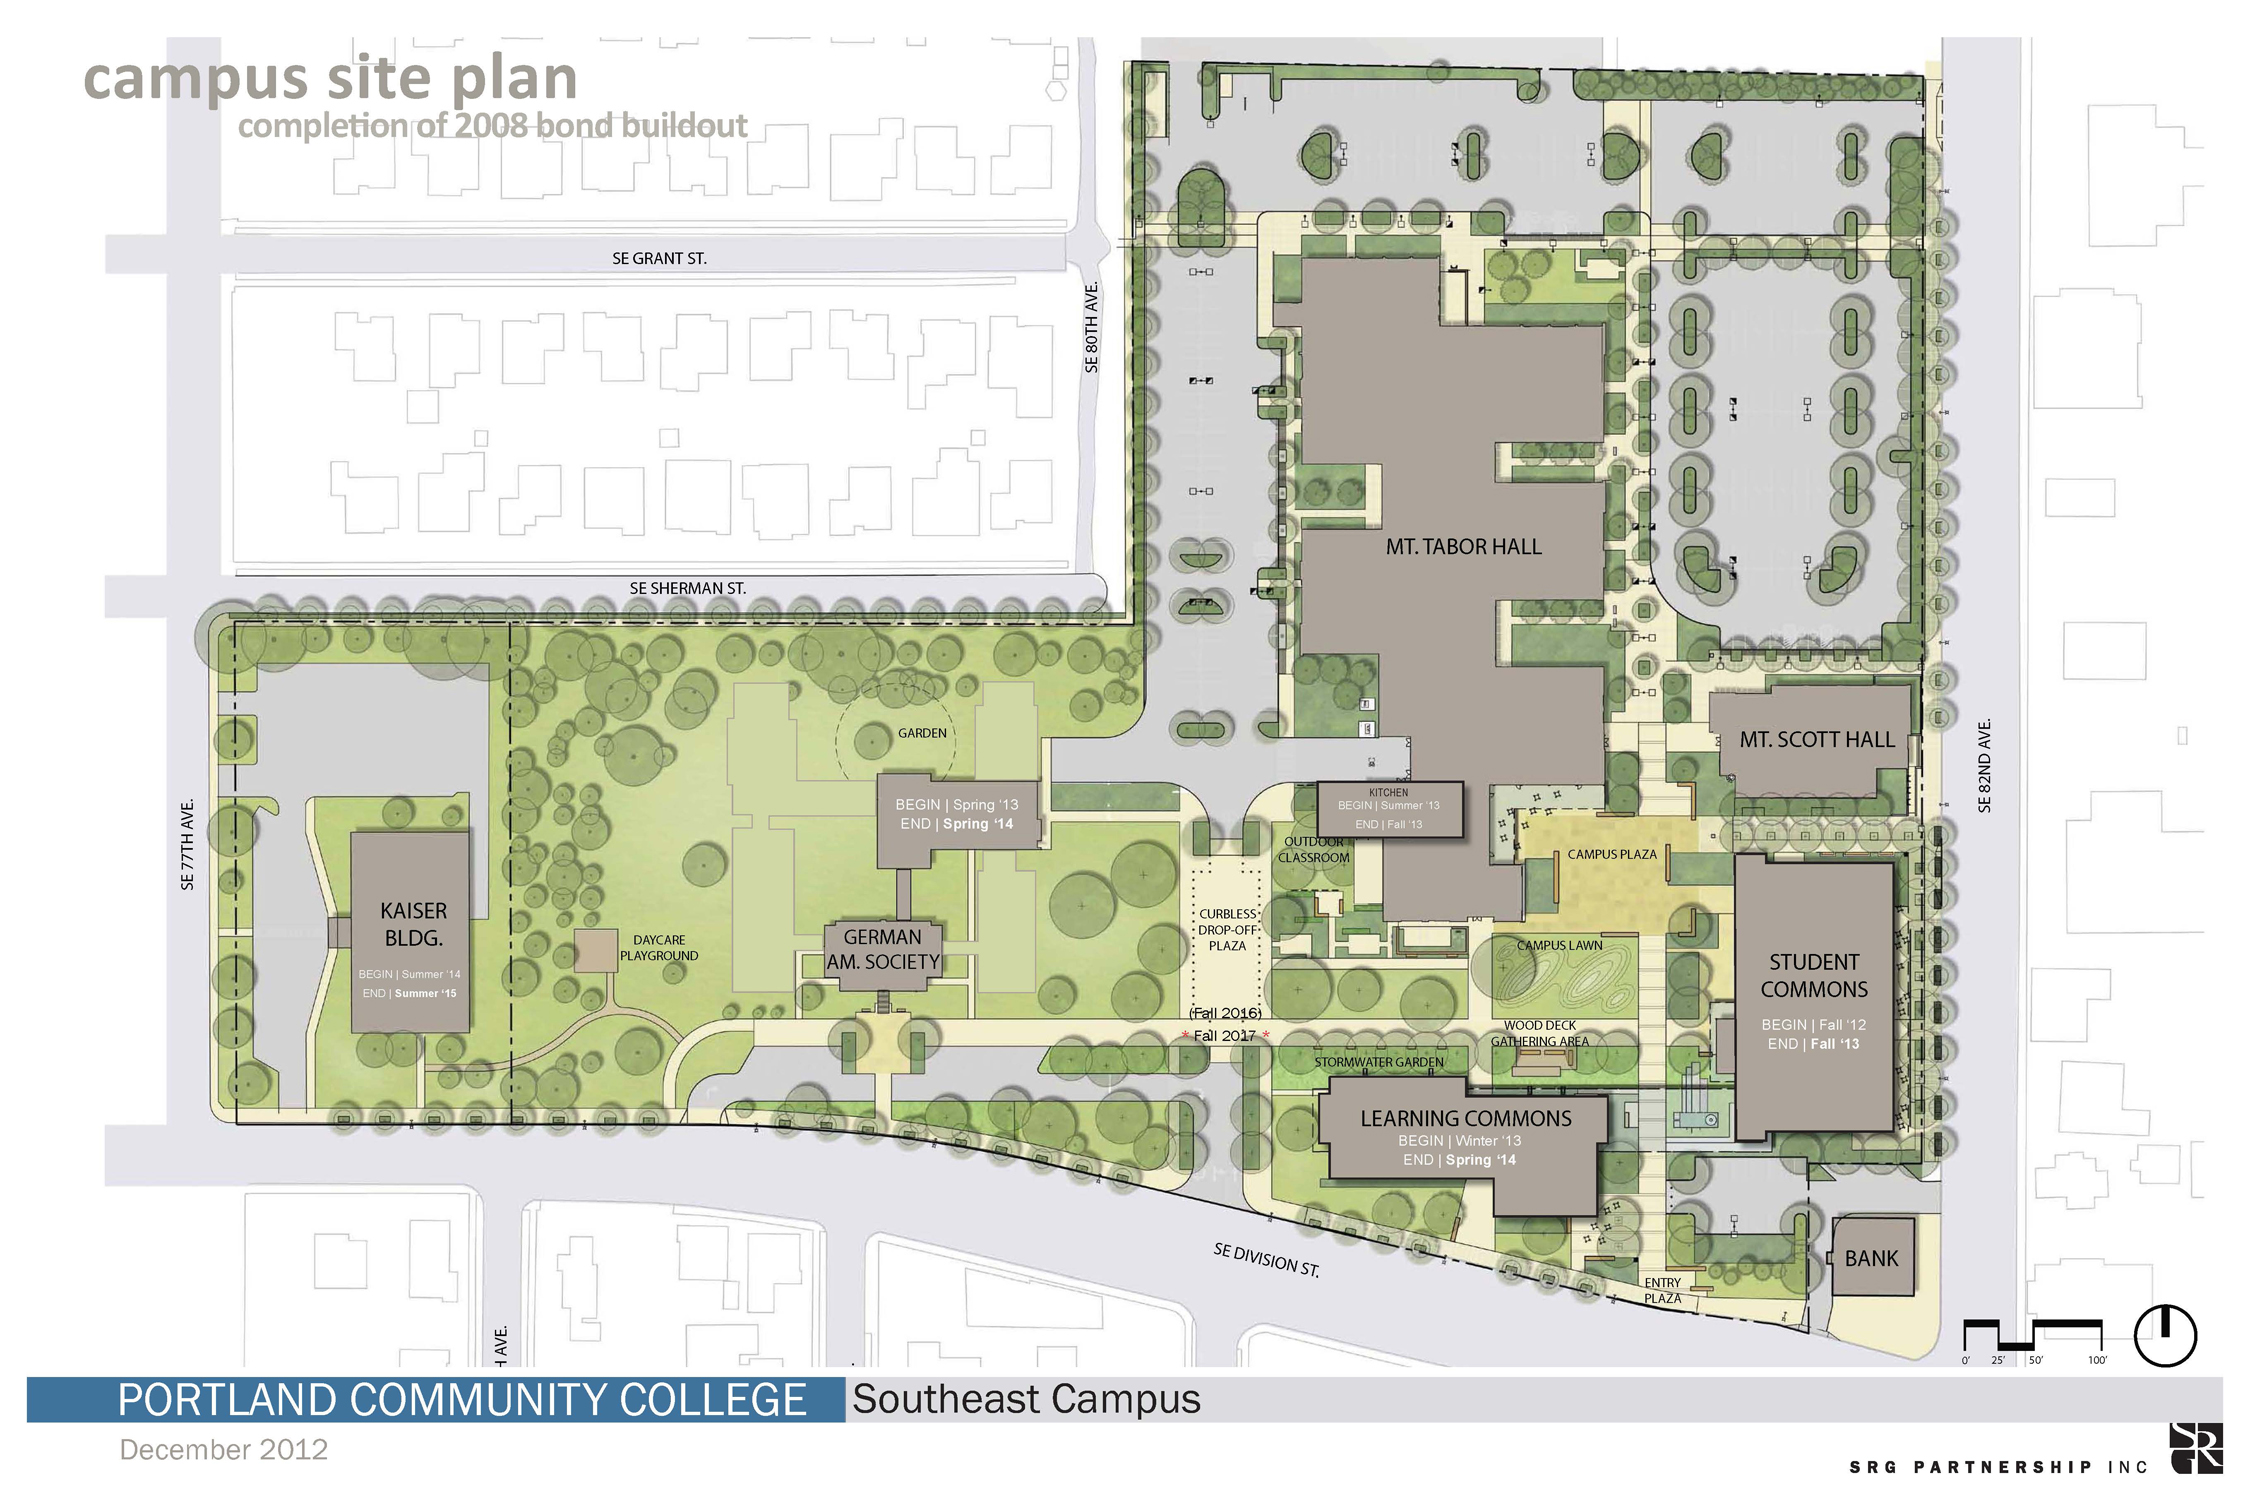 12.12.06 – SE Campus Schedule Site Plan – smaller image size for